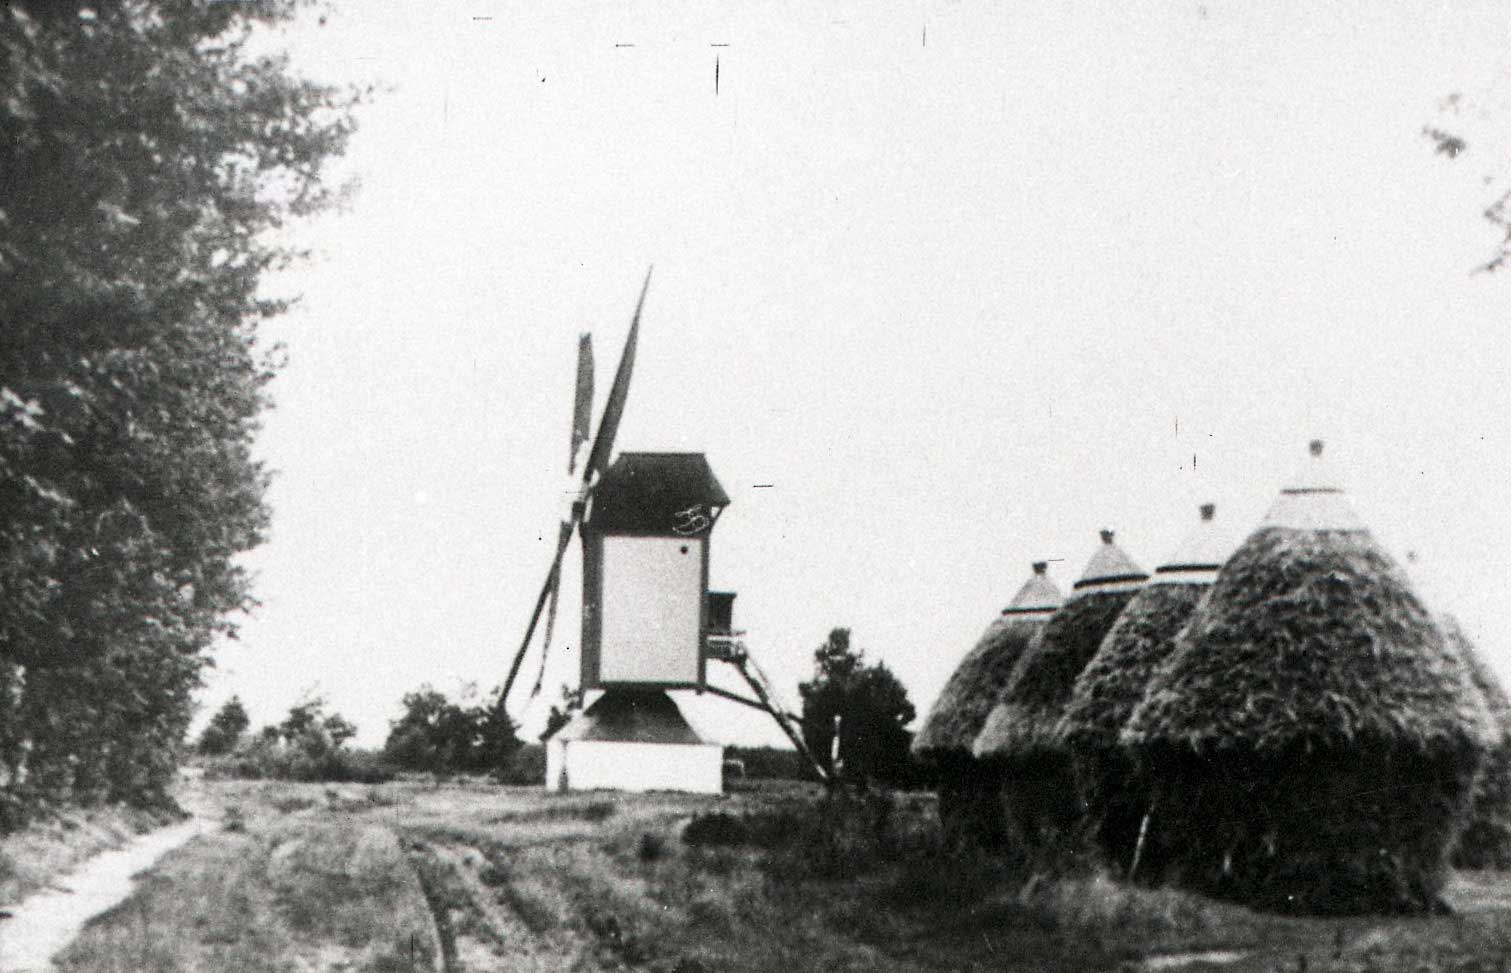 The Koeveringse mill with five haystacks was built during the rule of Duke John II in 1299. This was the oldest windmill in Schijndel and stood on the border of Sint Oedenrode, Schijndel and Veghel villages with grinding rights for the three municipalities.  Set on fire during the war in October 1944 (photo: C.J.A. van Helvoort. BHIC nr. 1572-08-061)